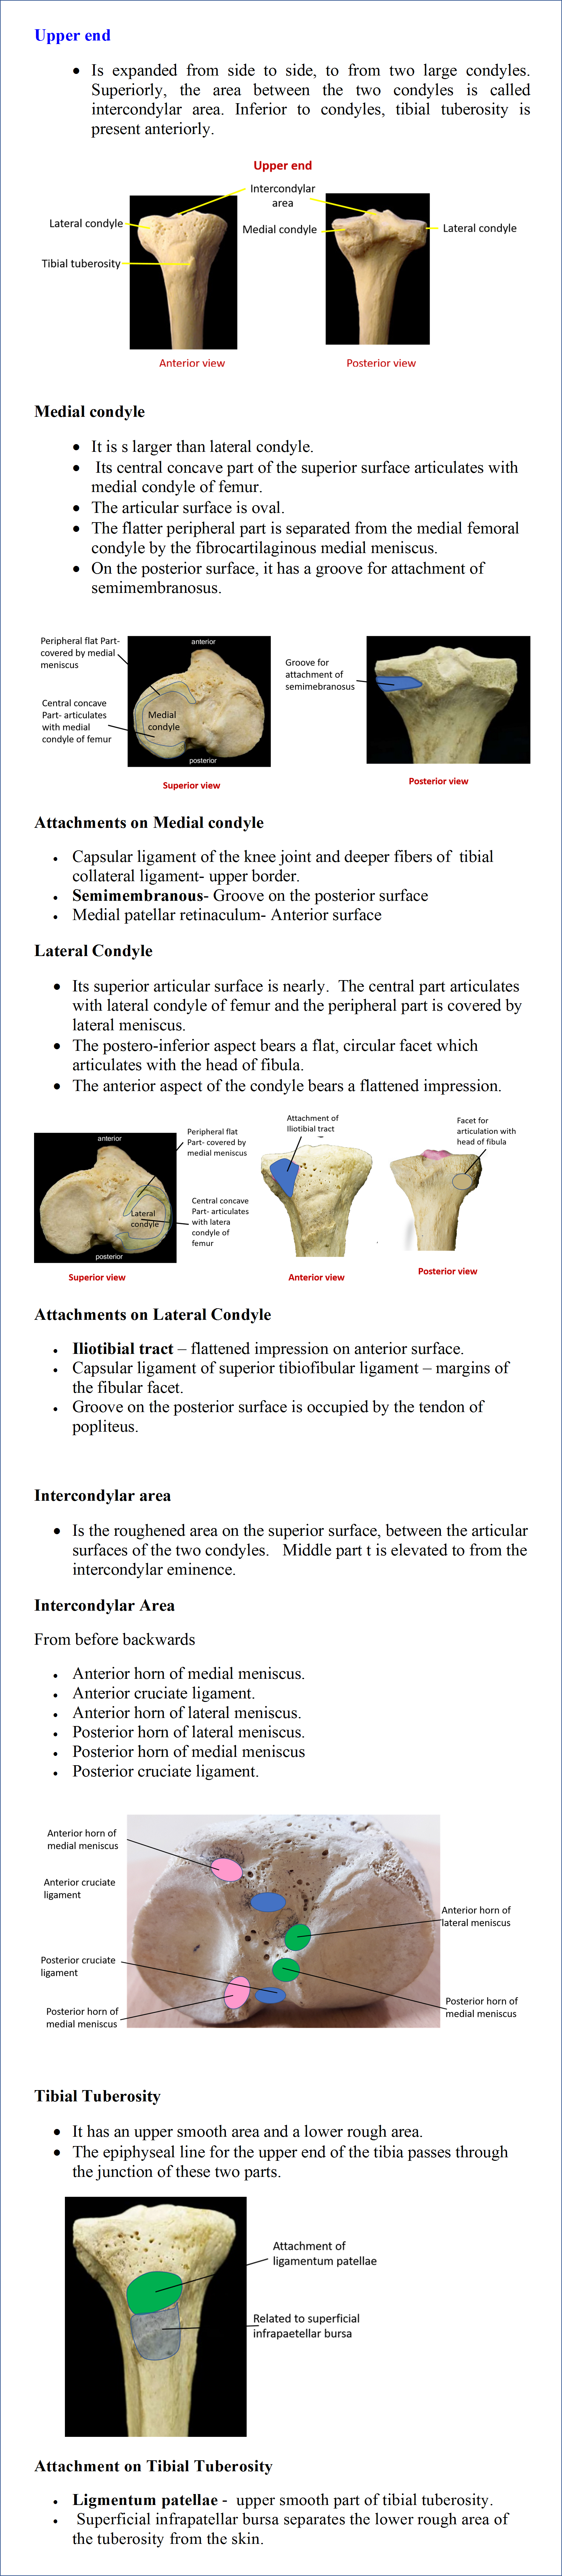 Upper end of Tibia- Medial and Lateral Condyles, Intercondylar area and muscle attachments, Tibial Tuberosity